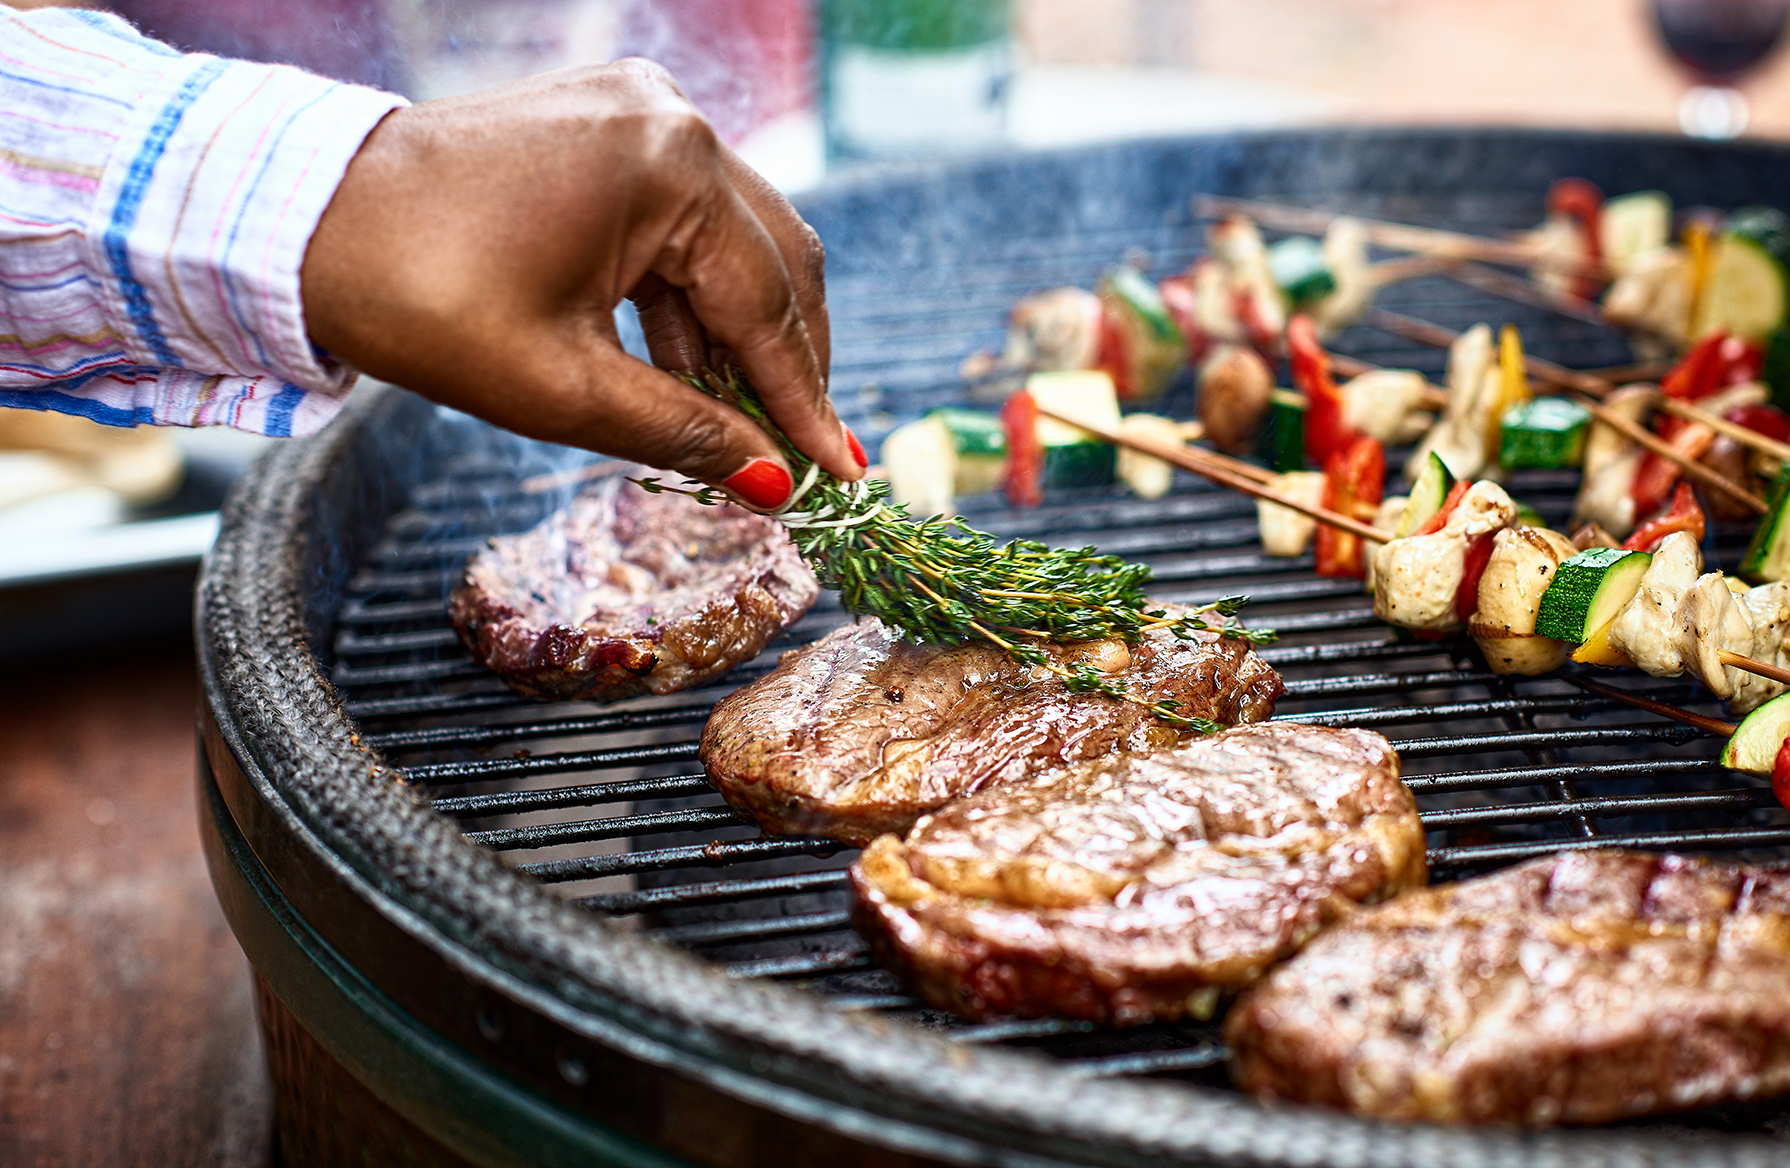 How to Grill for Beginners: What Mistakes You Should Avoid